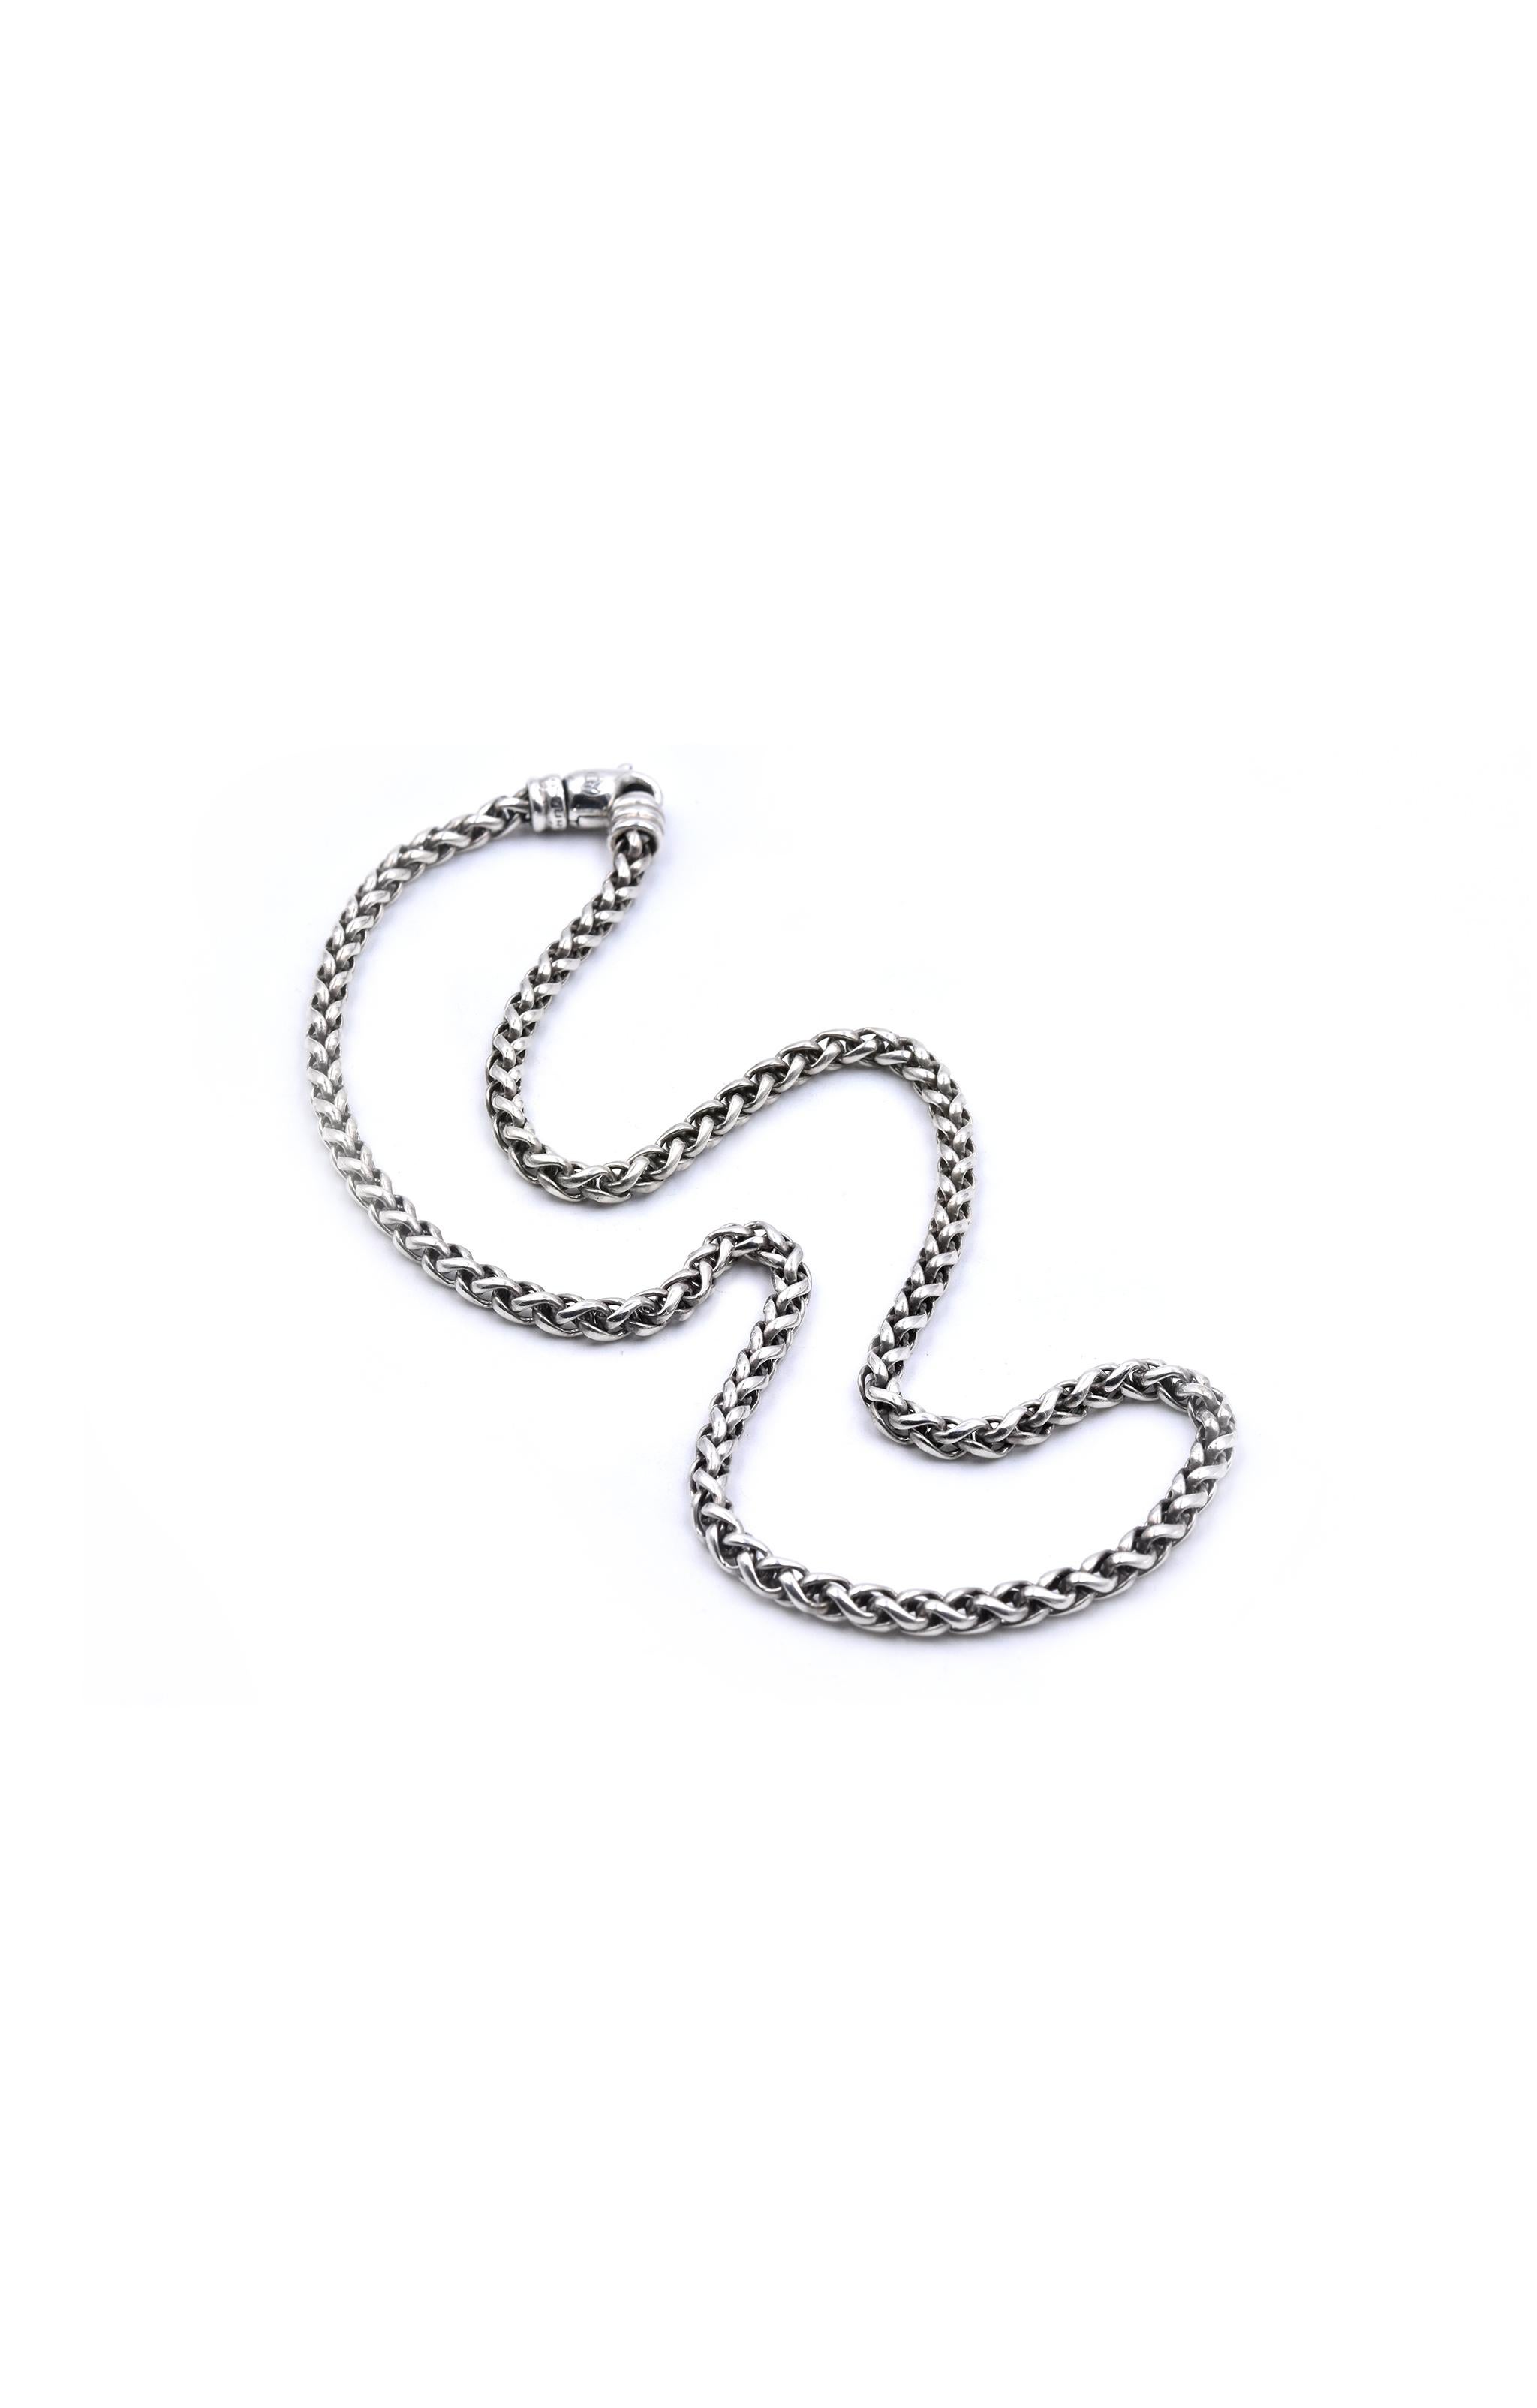 Designer: David Yurman
Material: sterling silver 
Weight: 26.16 grams
Measurement: necklace measures 16-inches long
